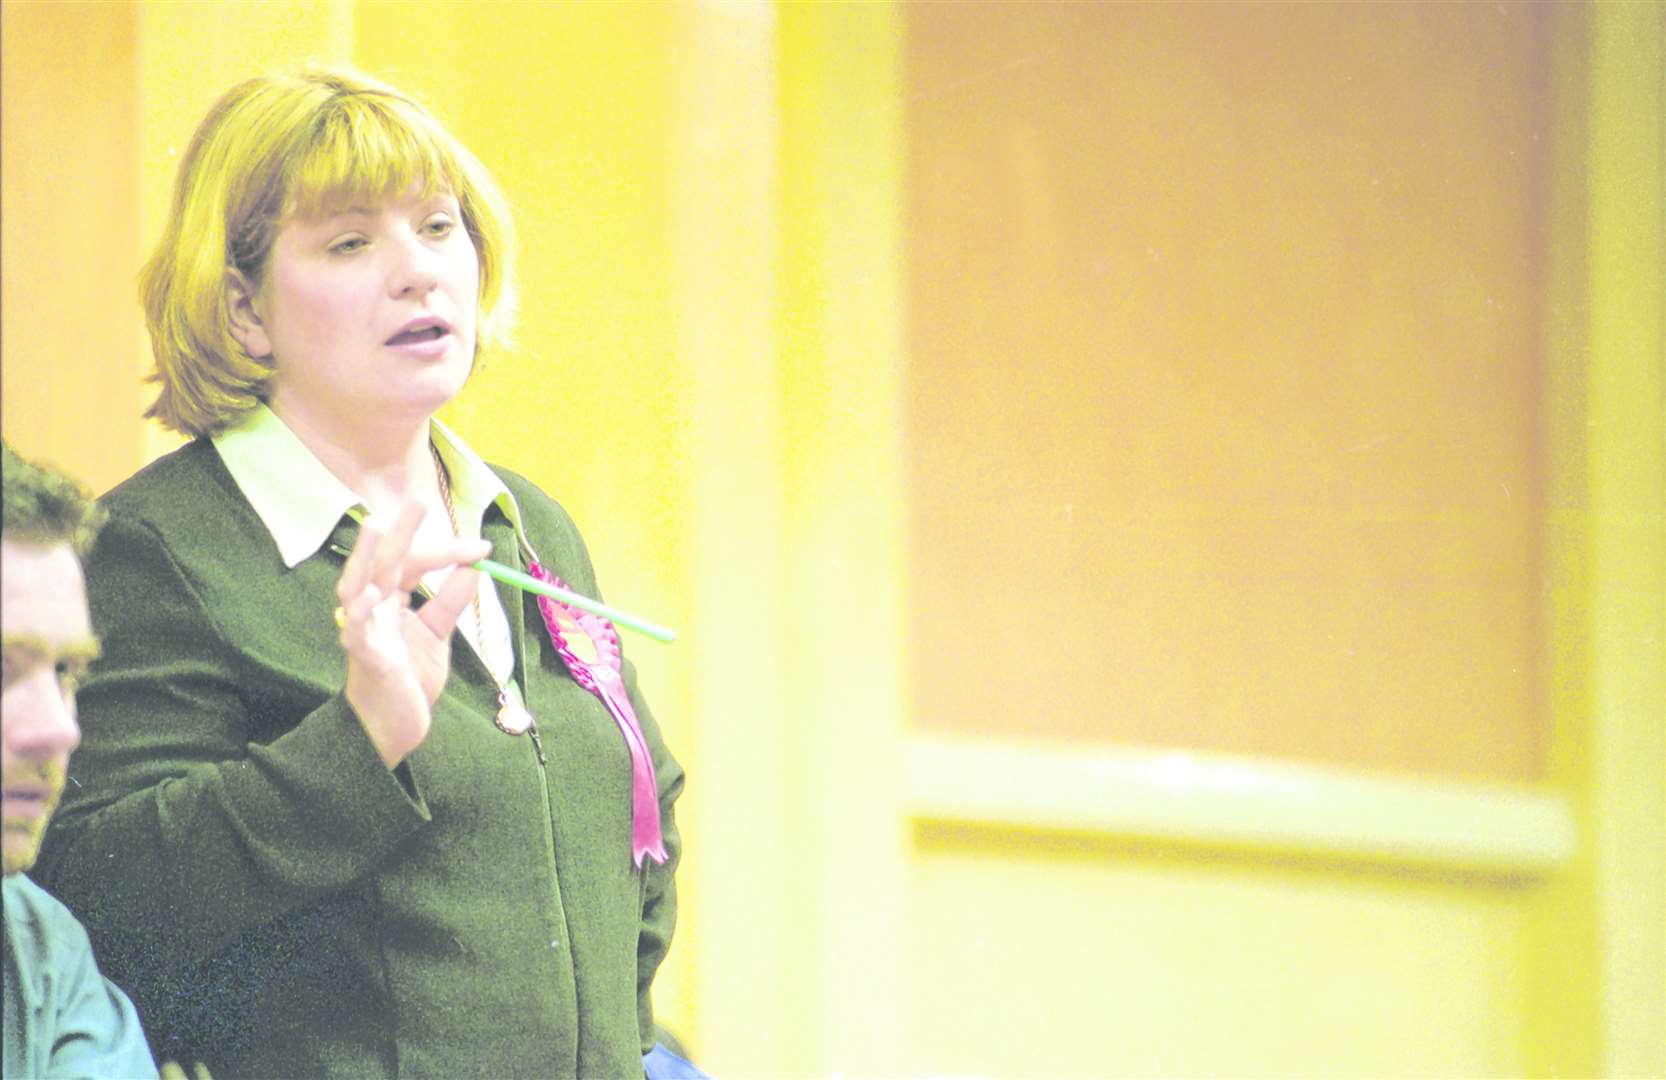 Then: Emily Thornberry on the hustings during the 2001 General Election campaign in Canterbury